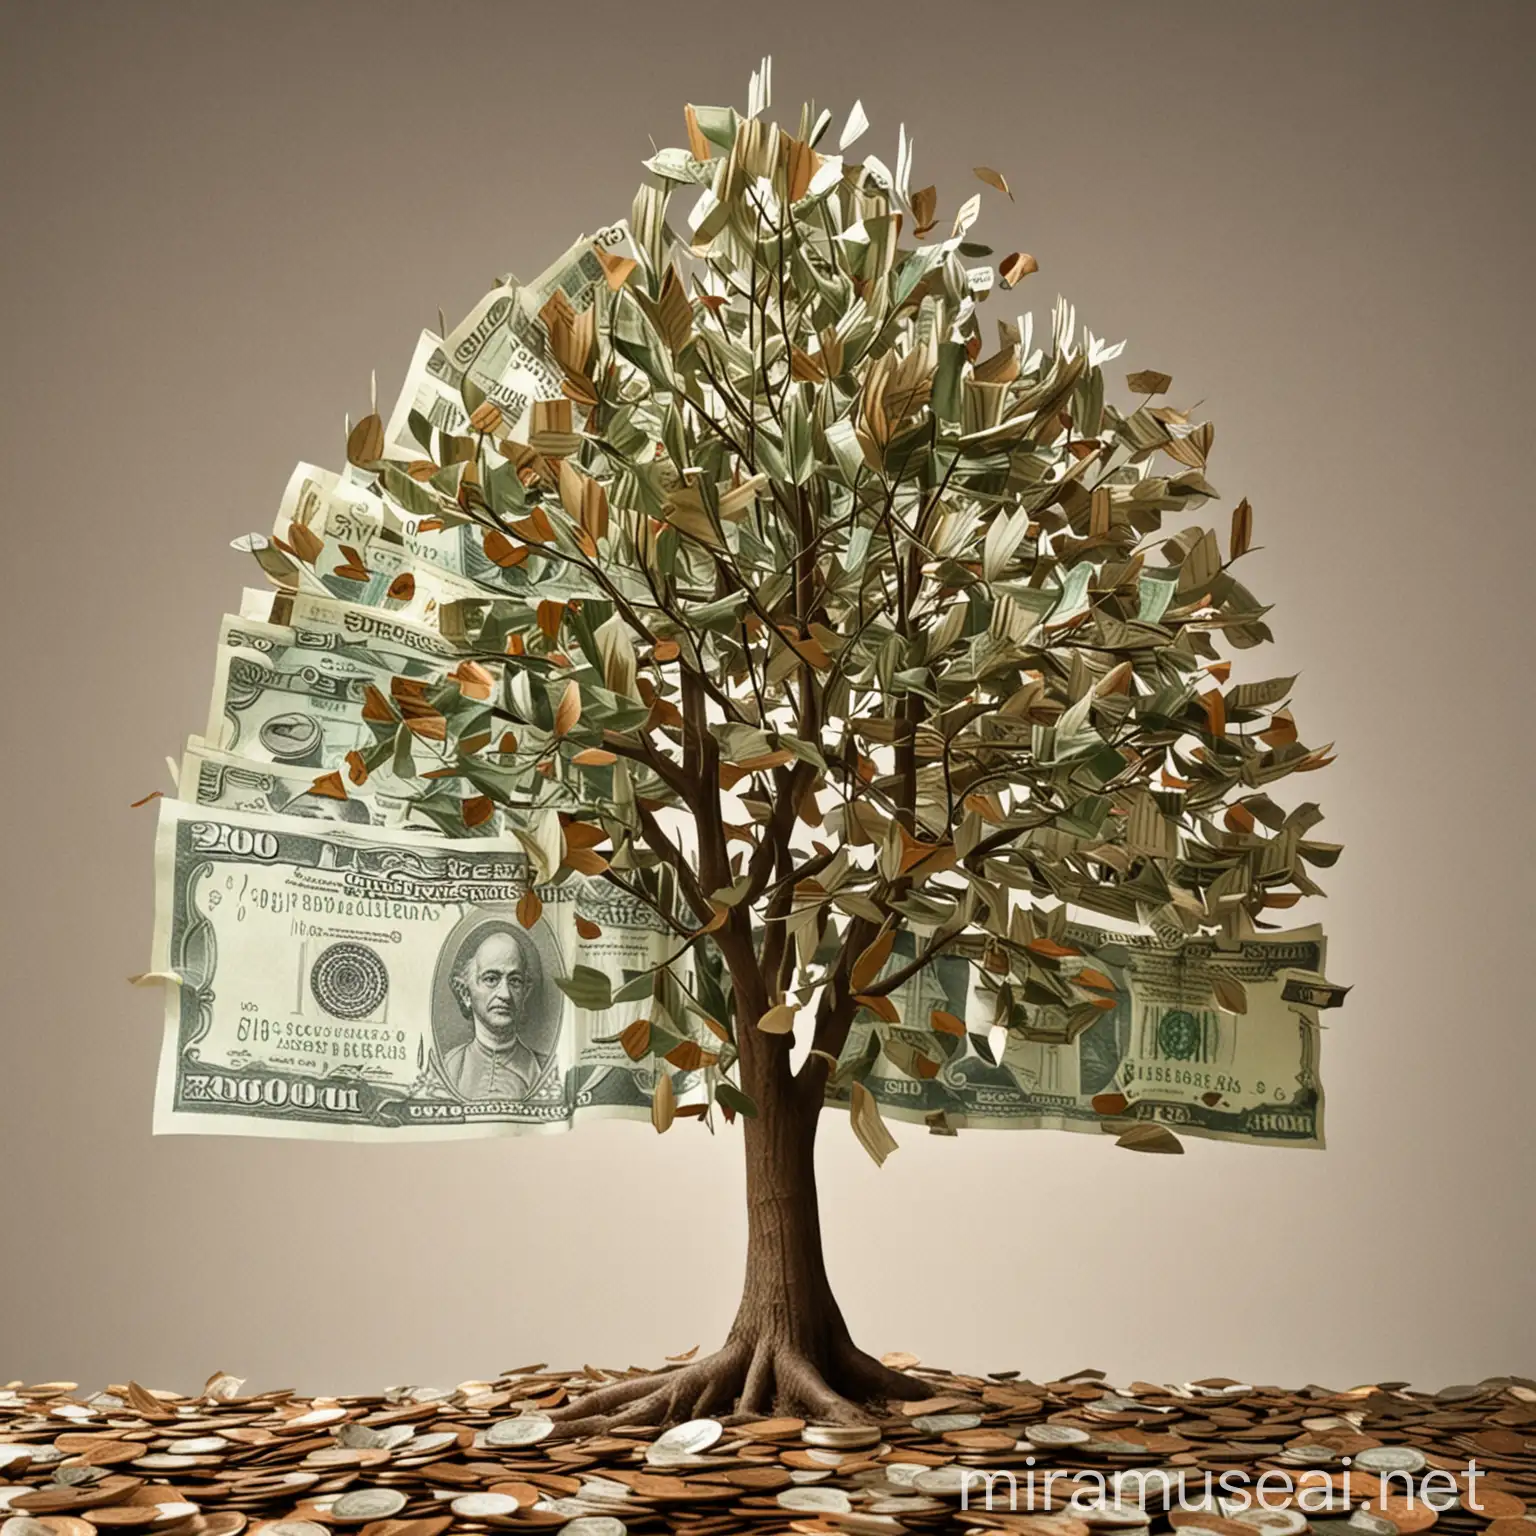 Create a image of tree putting 2000 note of India currency in the place of leaves.